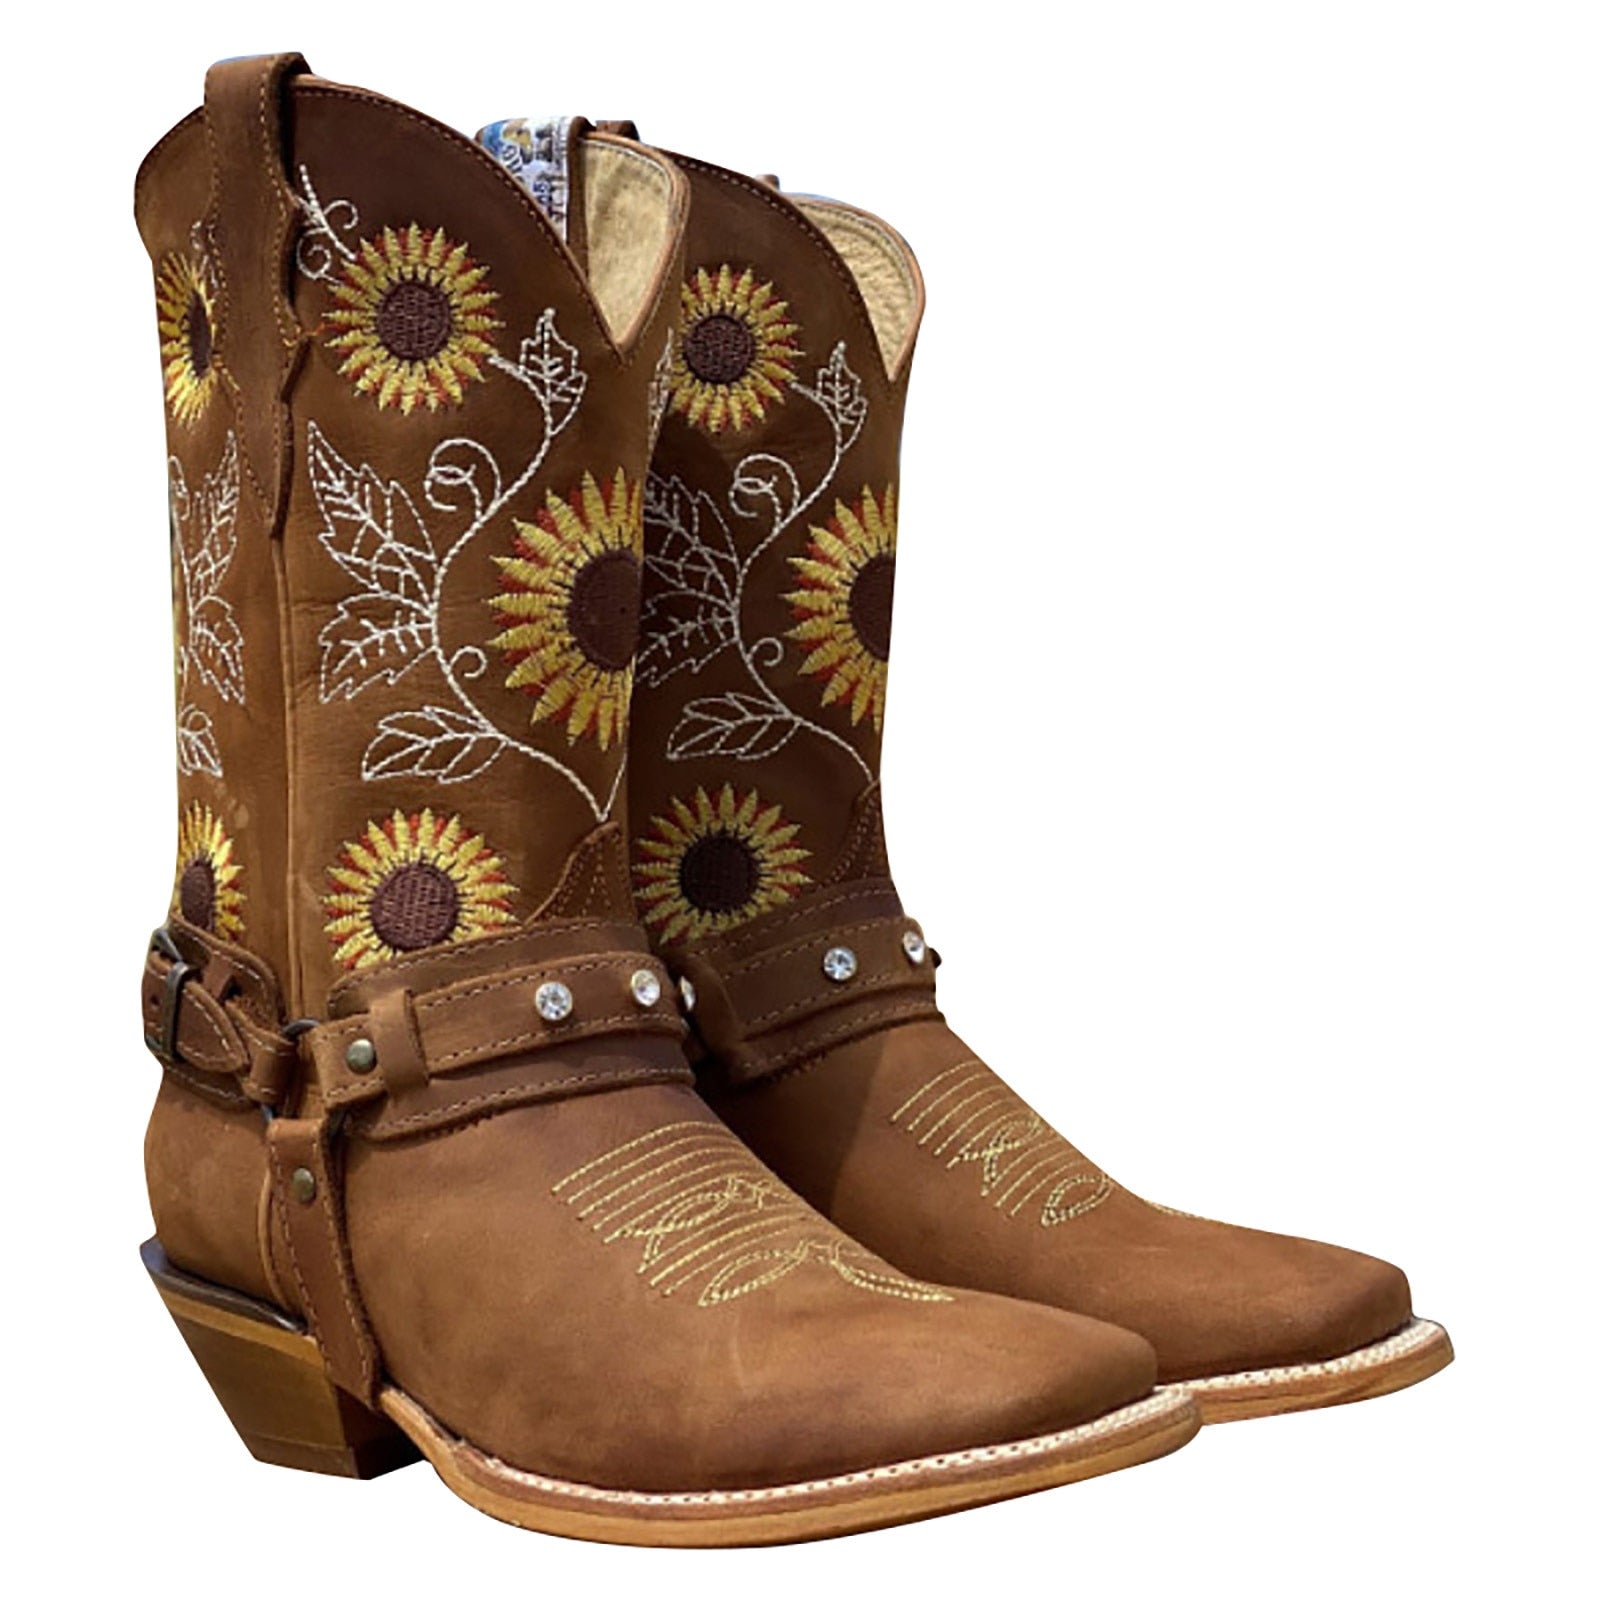 Embroidered  Women's Knee High Leather Cowboy Boots - Fashion Damsel